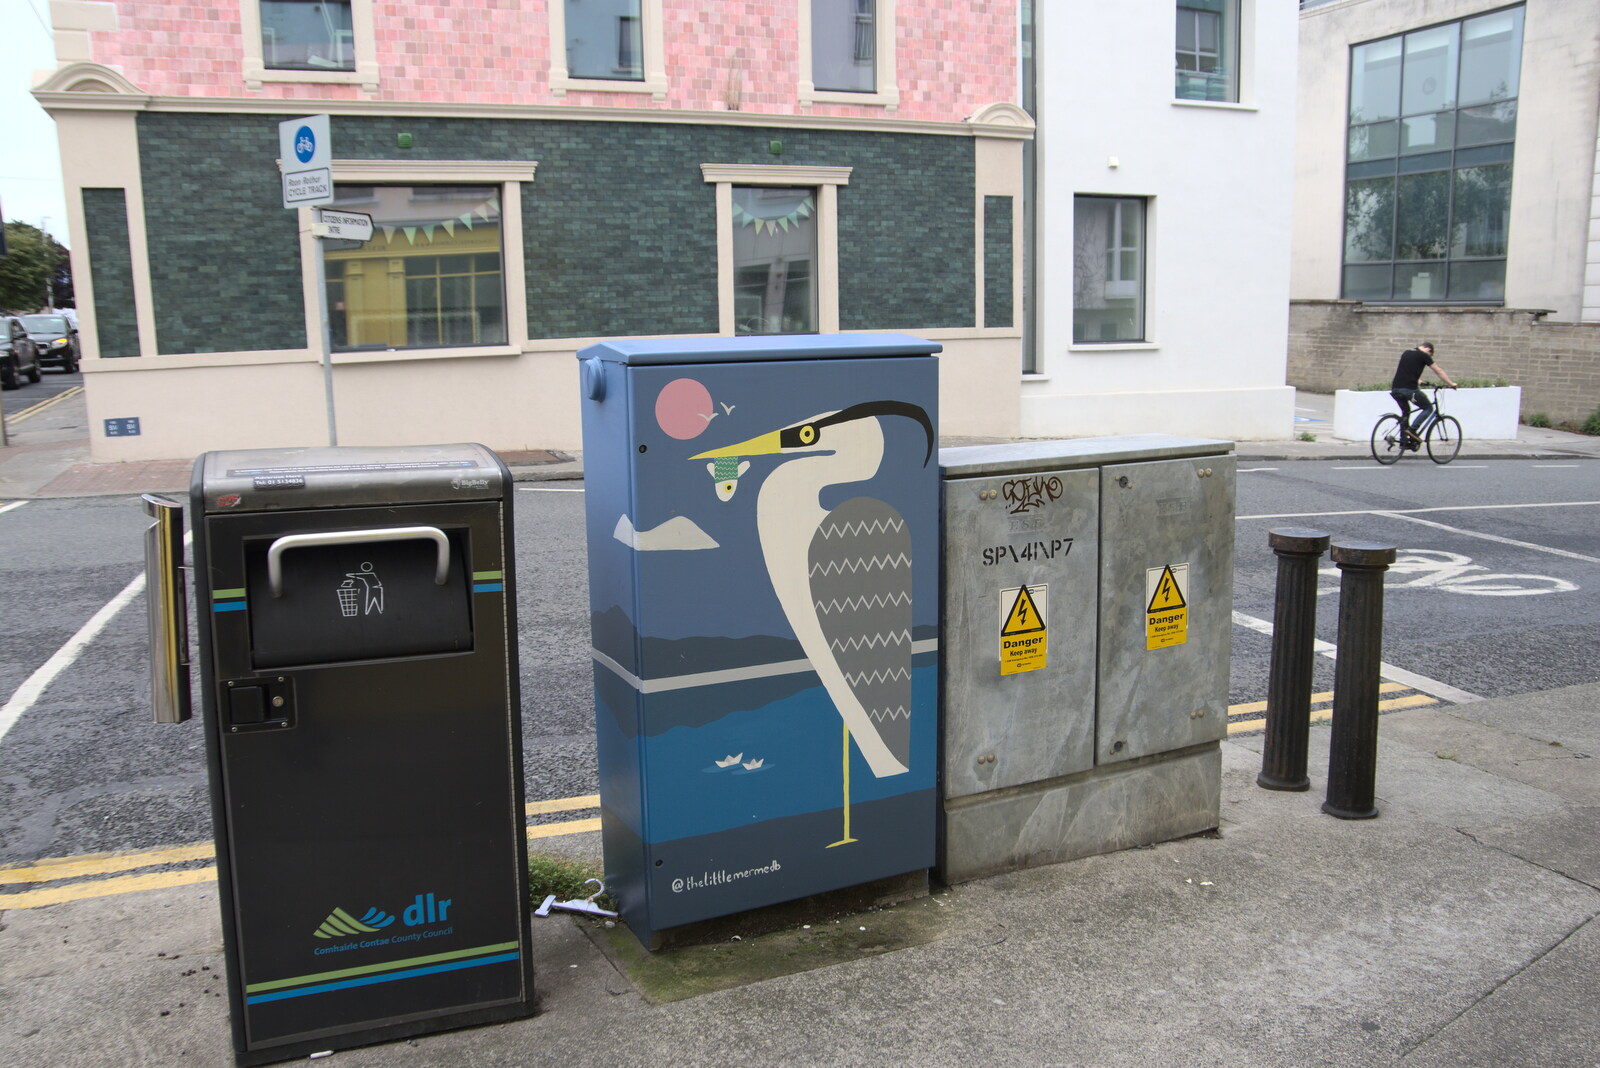 A heron on a traffic light control box from Manorhamilton and the Street Art of Dún Laoghaire, Ireland - 15th August 2021